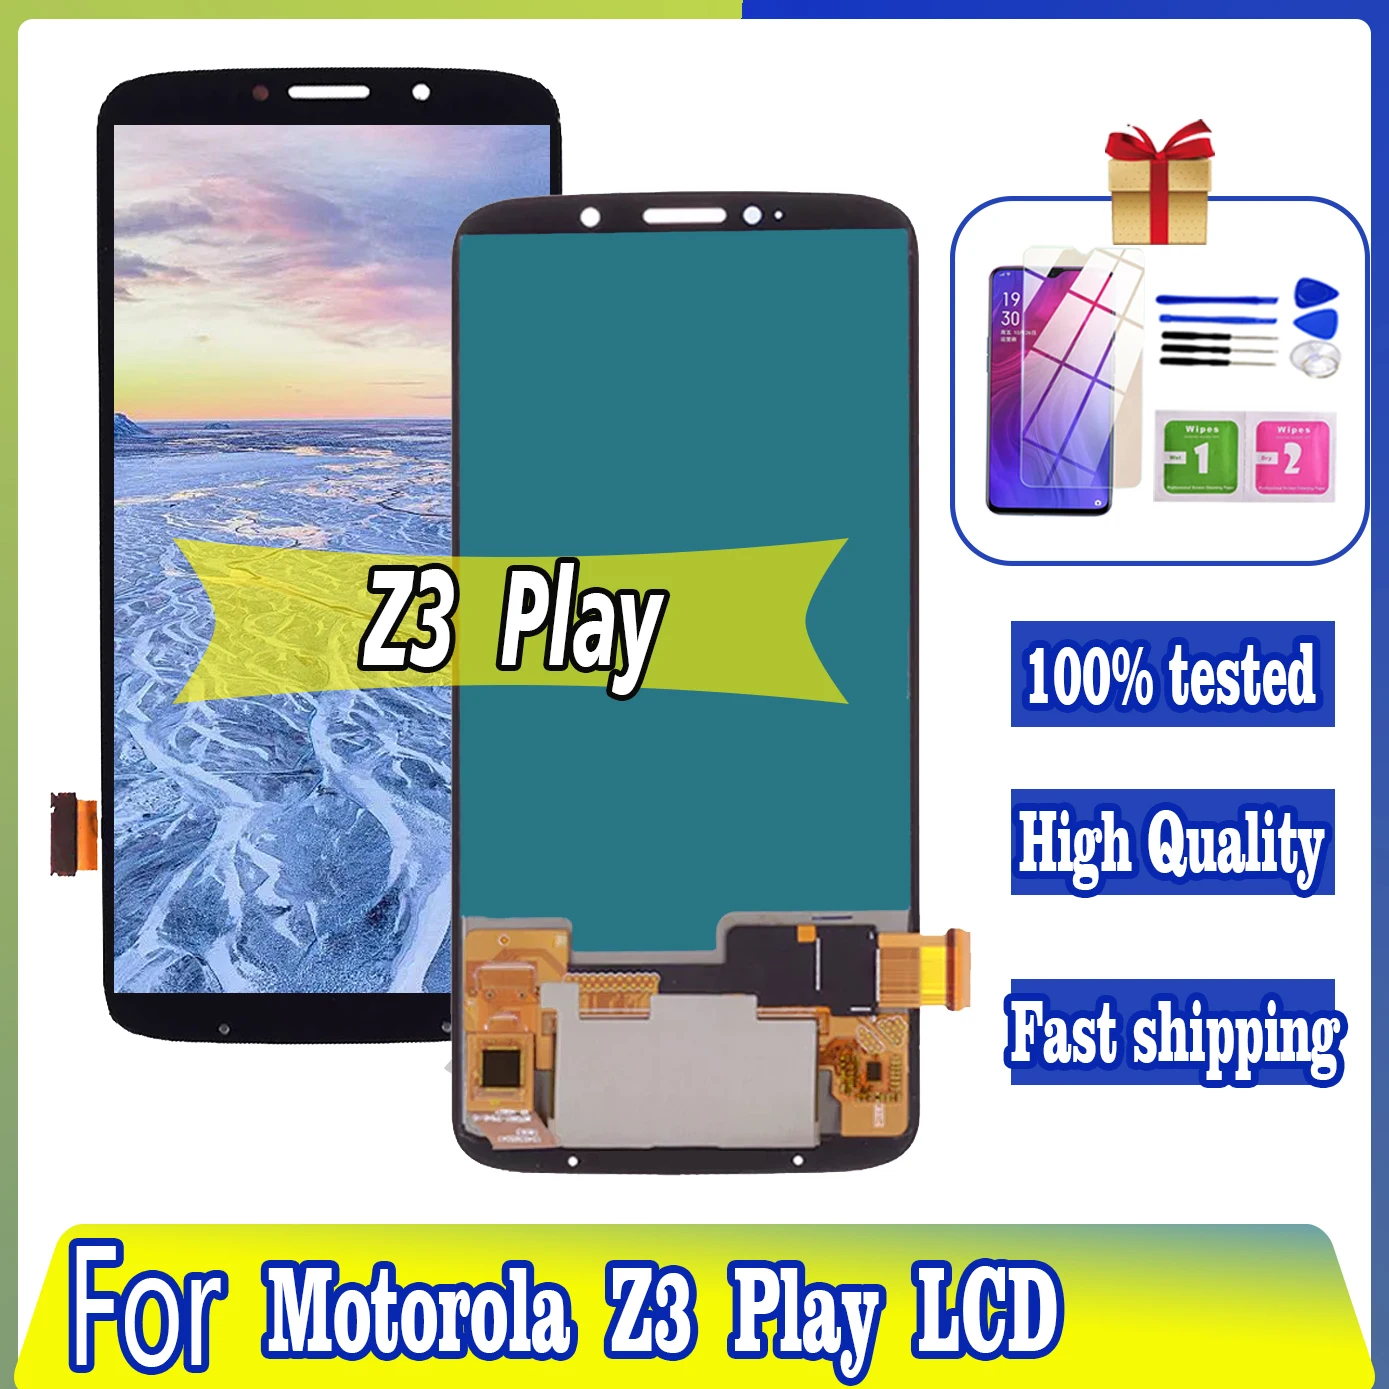 601-screen-for-motorola-z3-play-xt1929-display-lcd-touch-screen-panel-assembly-digitizer-lcd-display-replacement-repair-parts